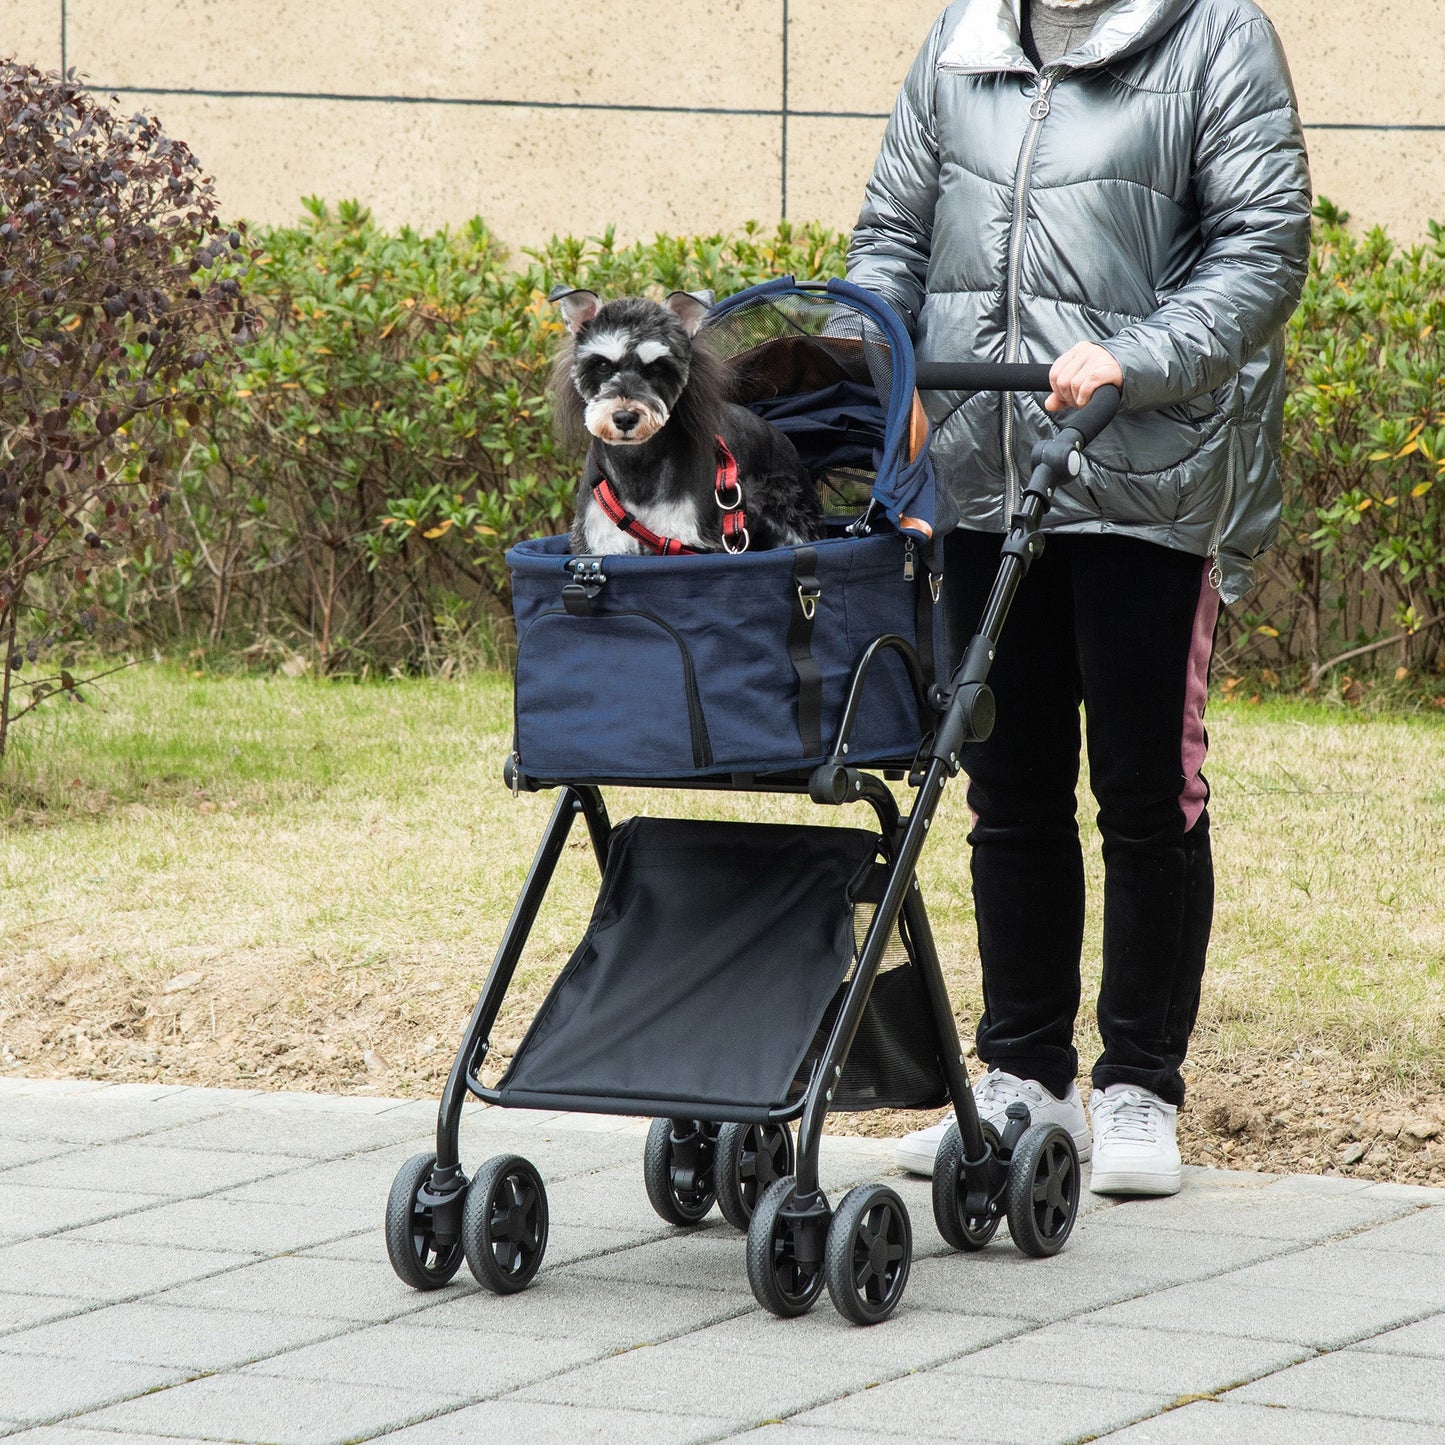 Pet Supplies-Luxury Folding Pet Stroller Dog/Cat Travel Carriage 2 In 1 Design Pet Carrier Bag + Stroller with Wheels Adjustable Canopy - Blue - Outdoor Style Company